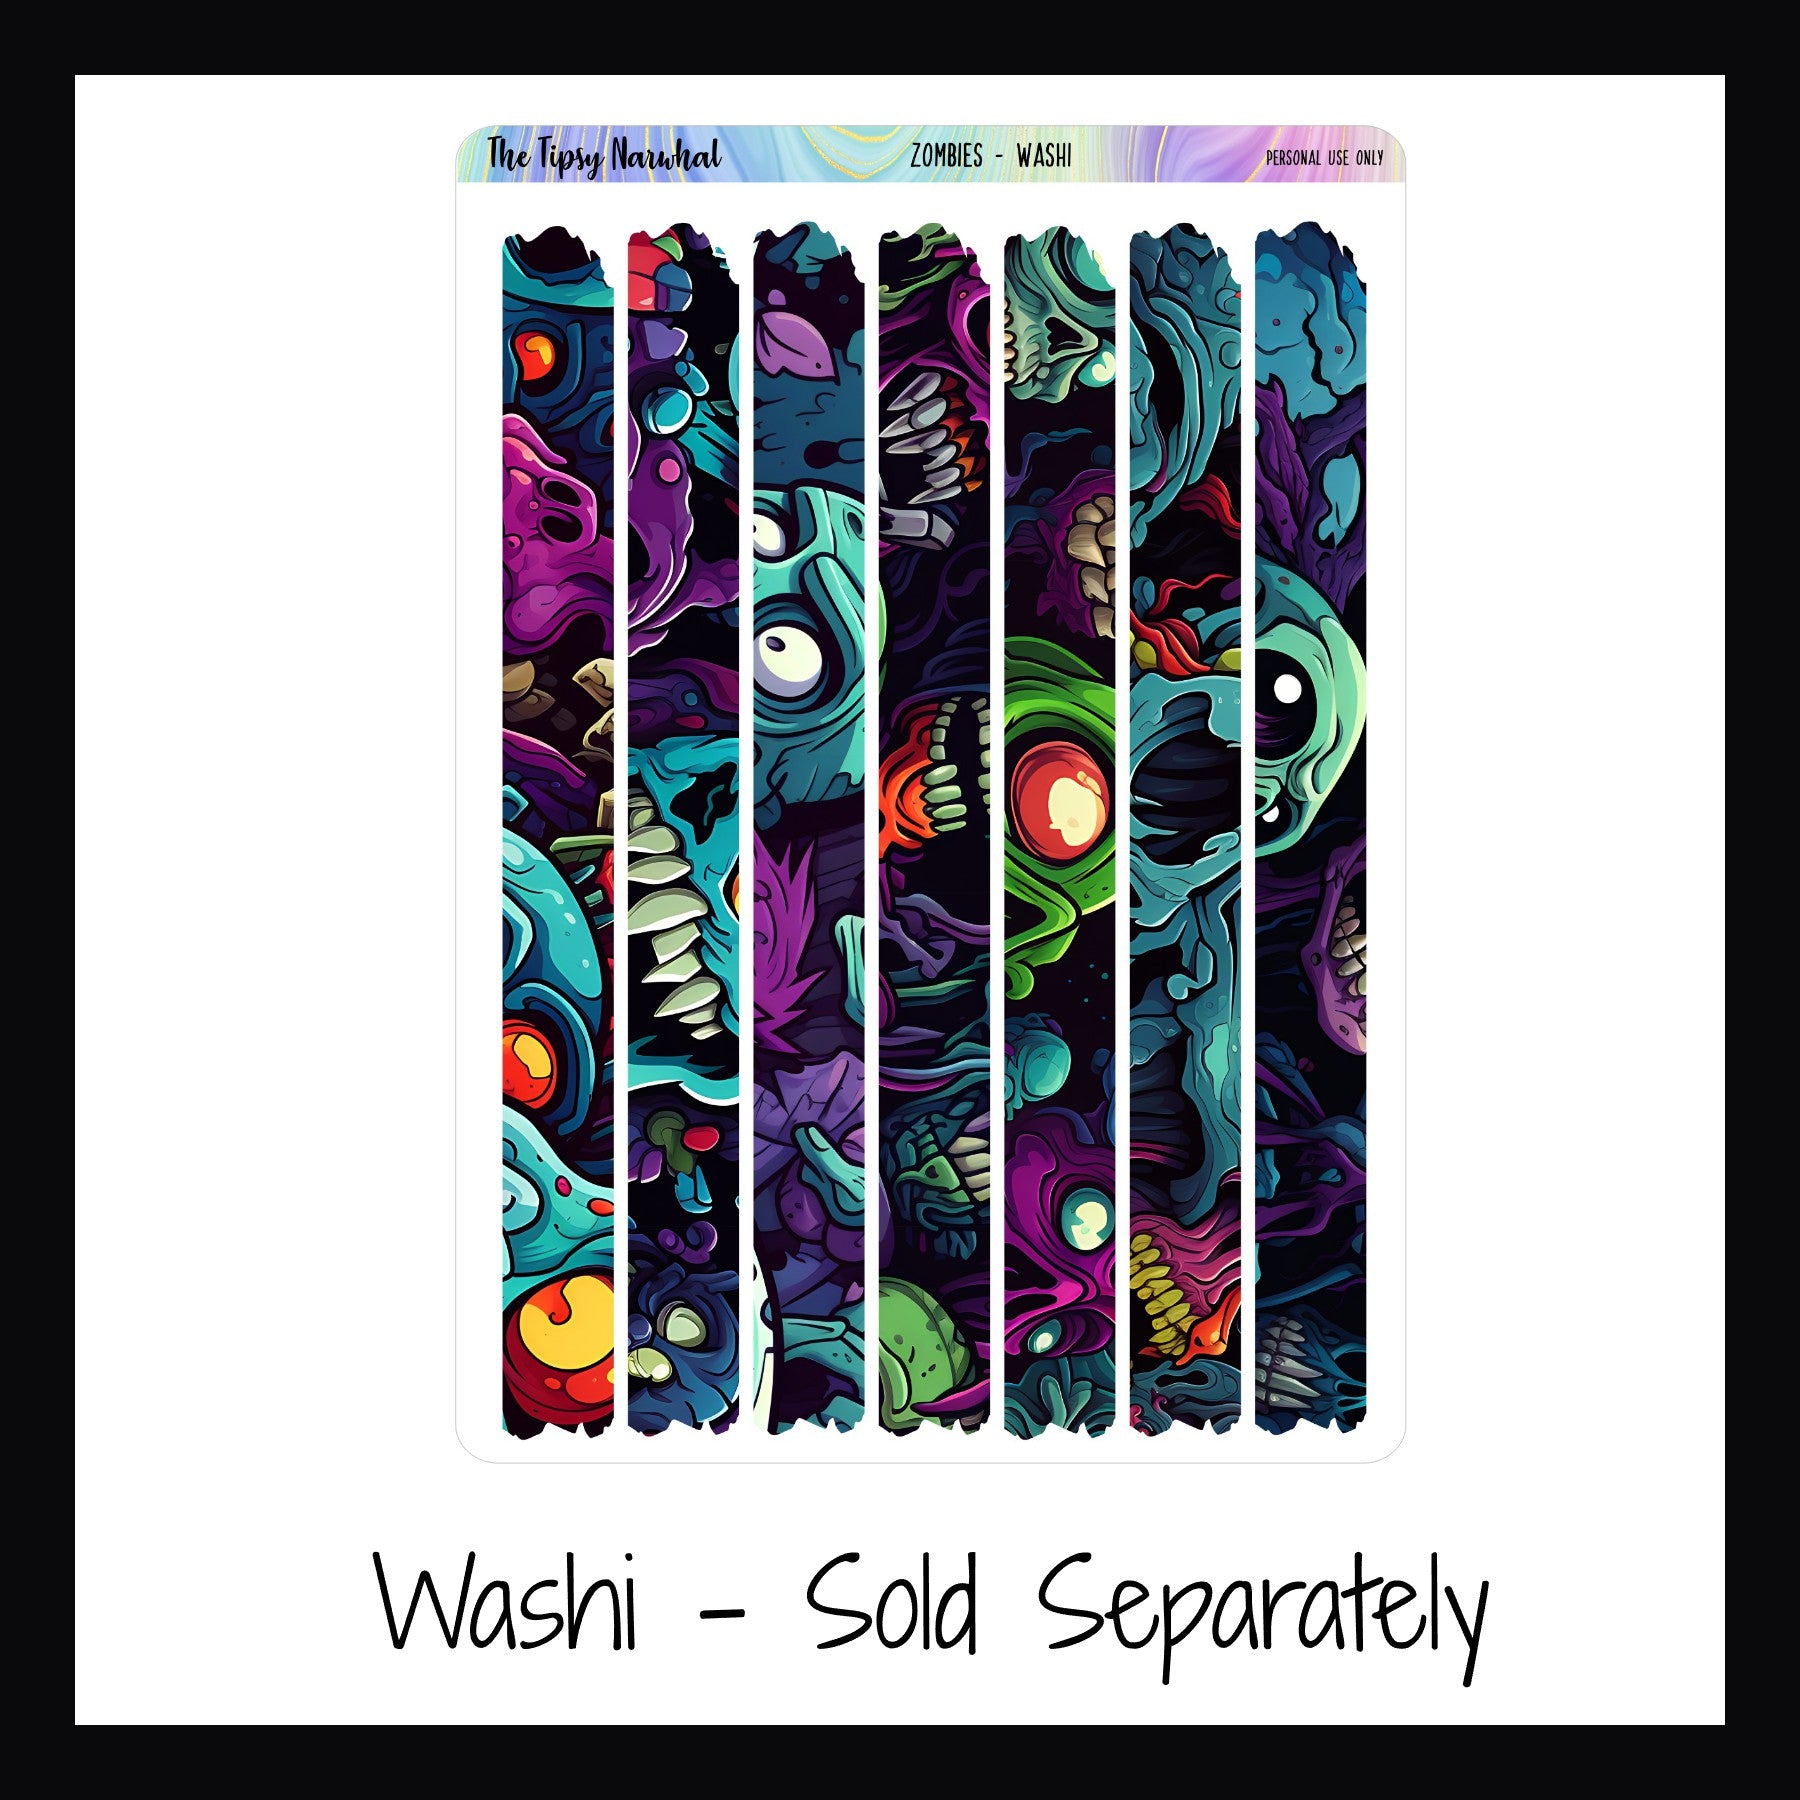 Zombies Washi Strips Sheet, 7 Washi Strips, Zombie Themed, Vivid Colors, Abstract Zombie Pattern